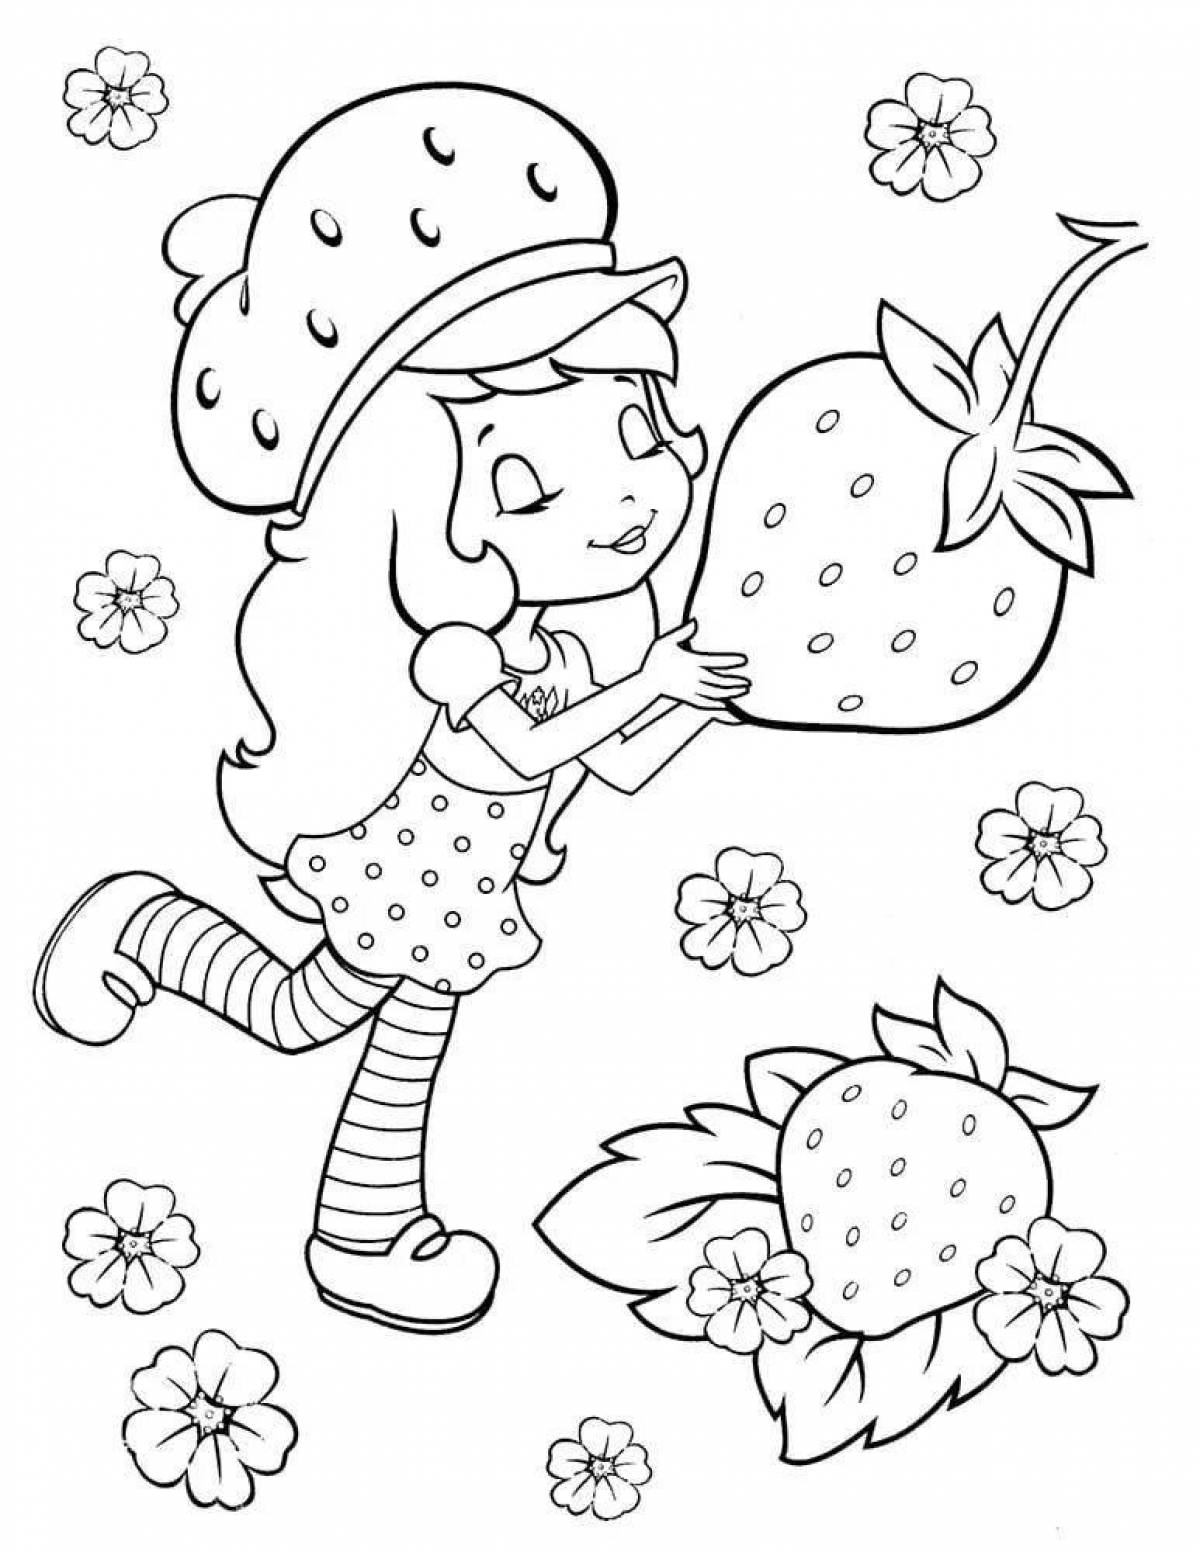 Coloring page cheerful strawberry girl